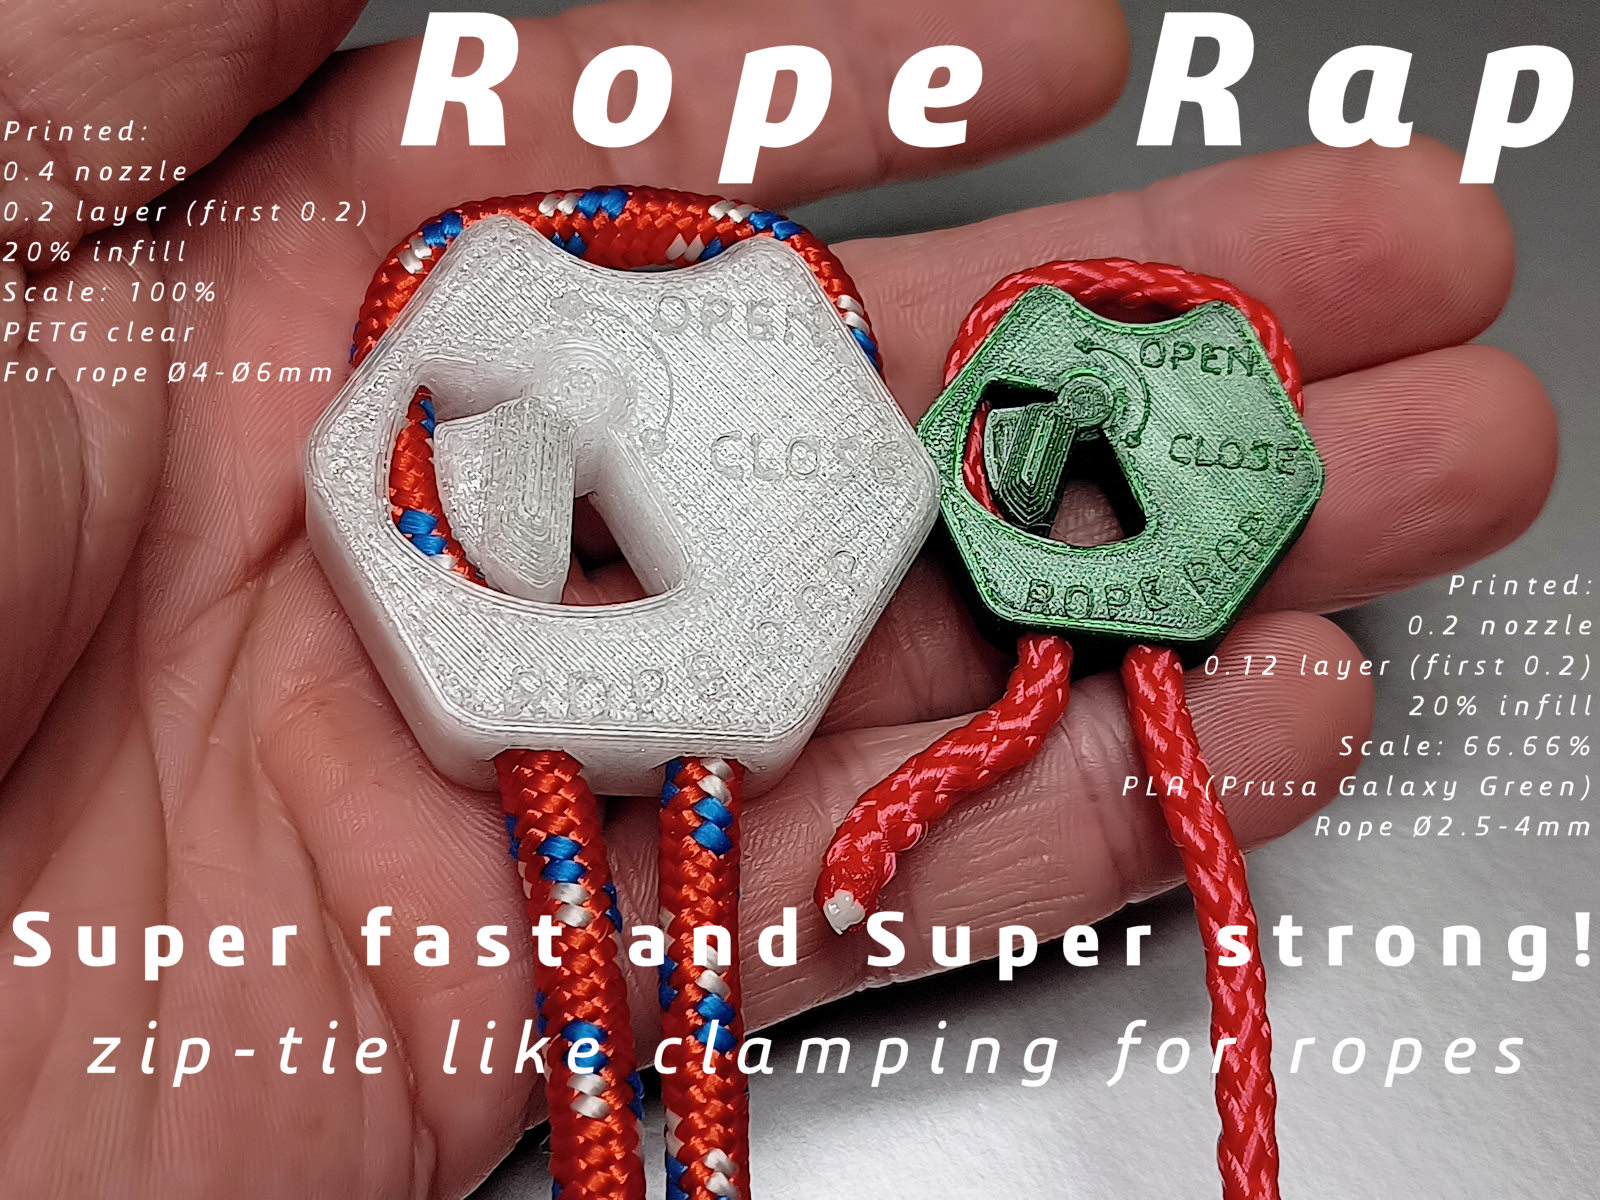 Rope Rap (like a TyRap, fast and strong) by Wim V